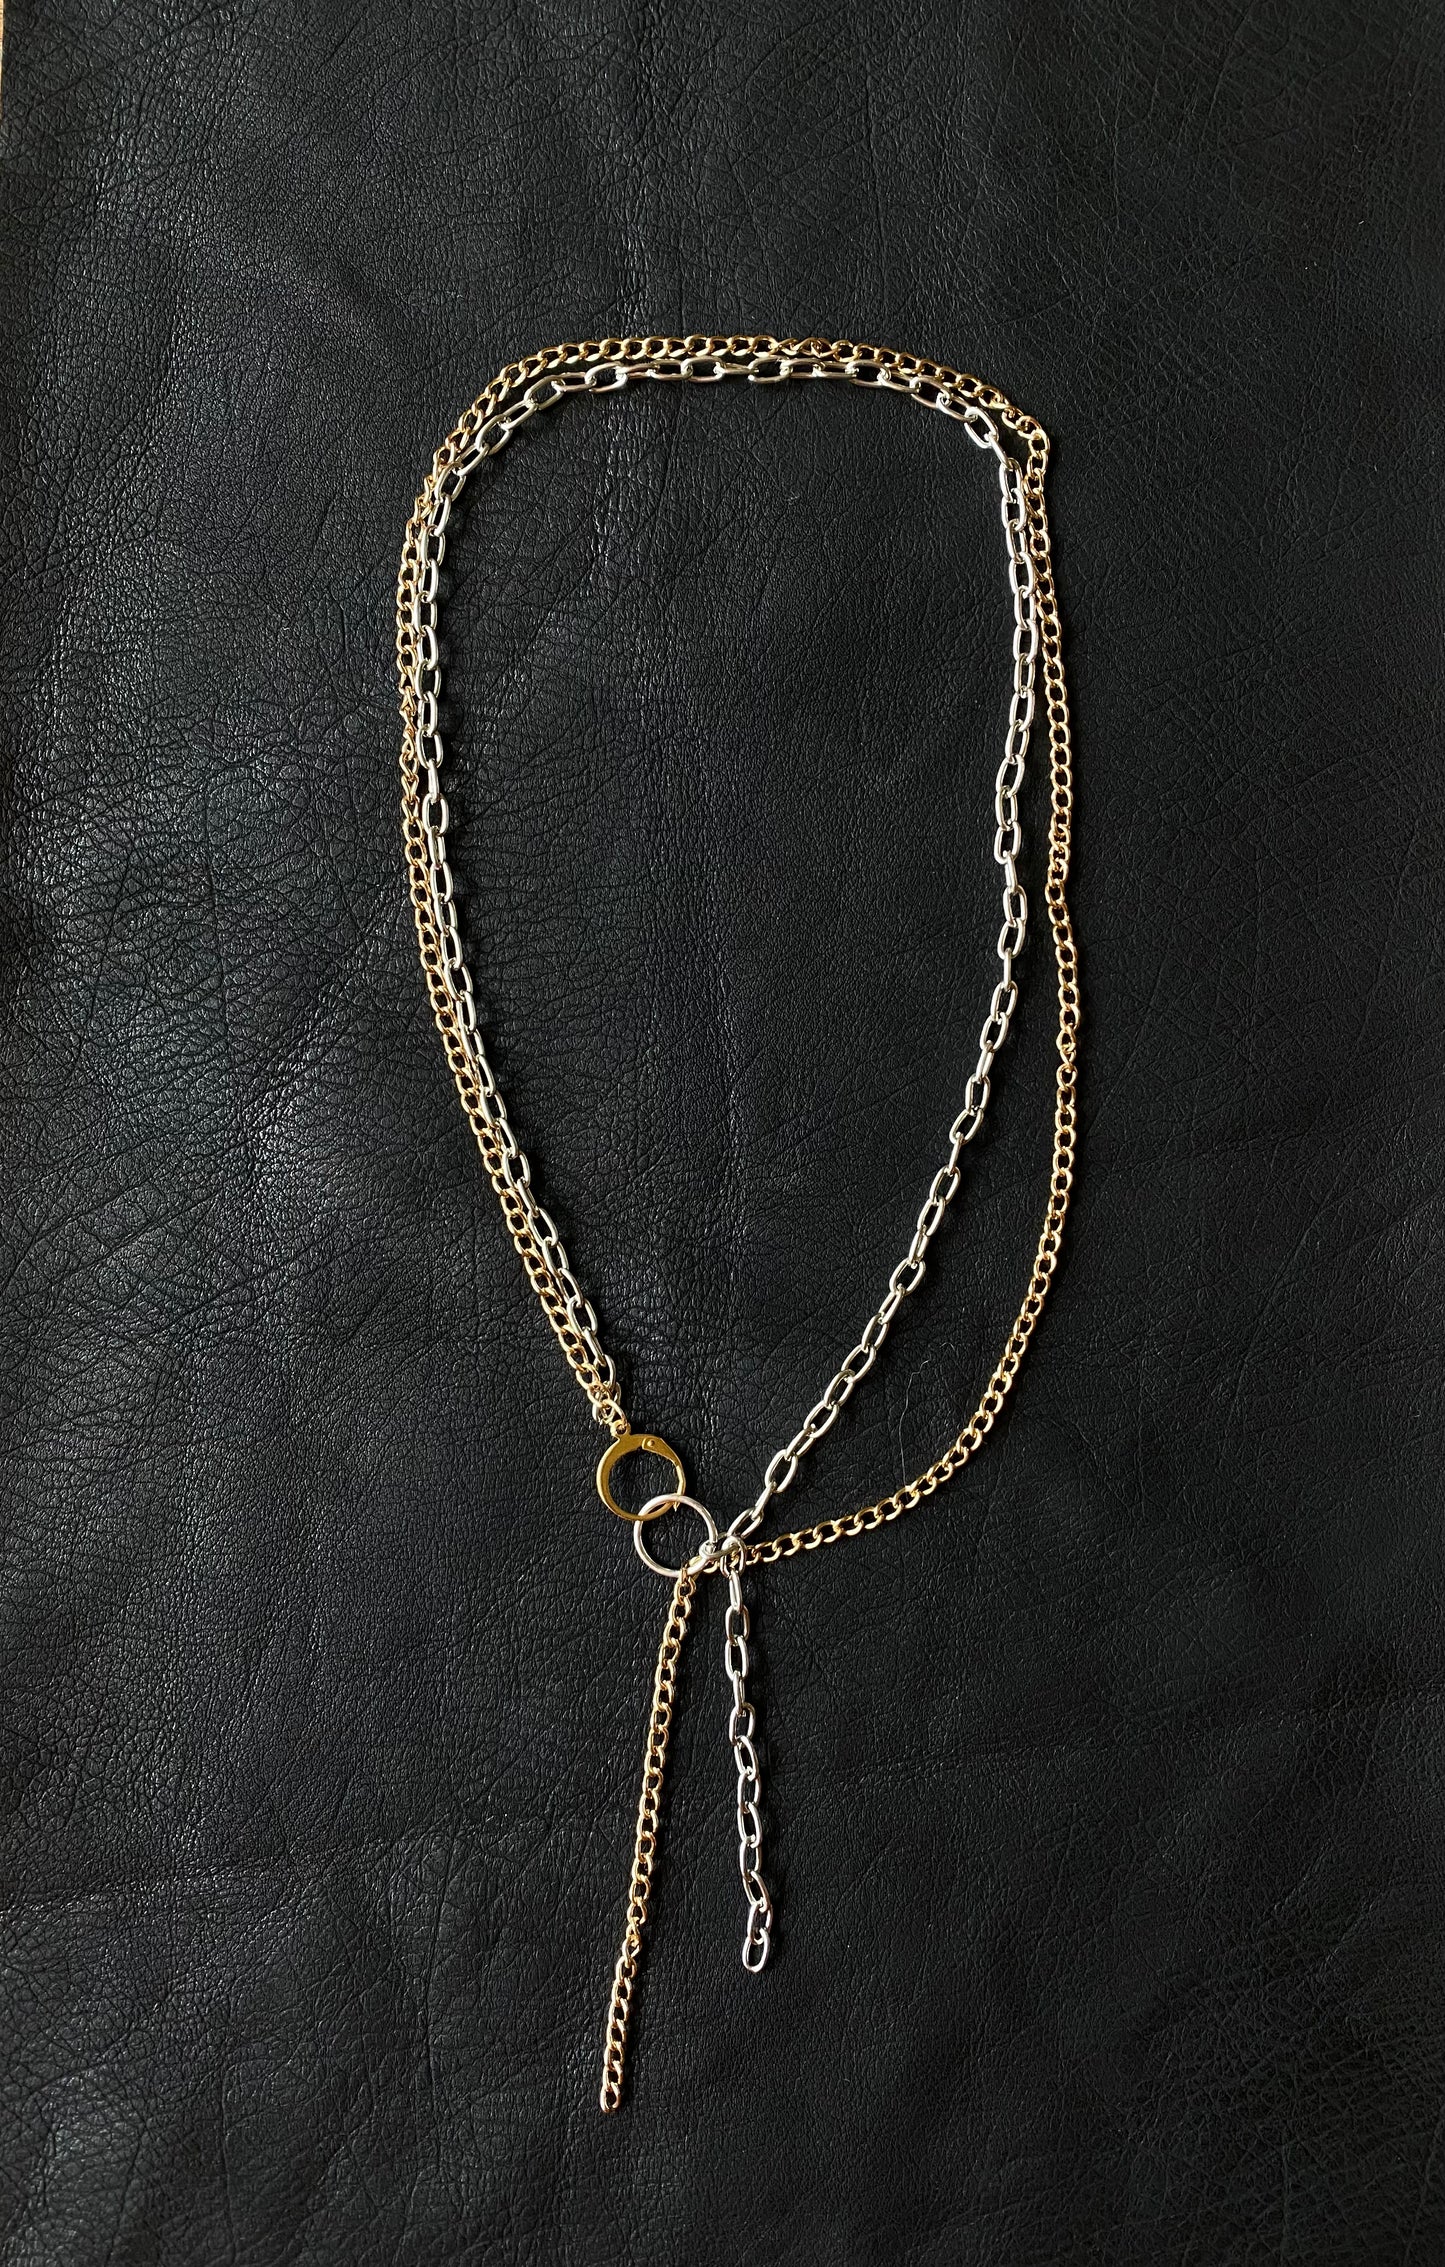 Gold and silver chain necklace